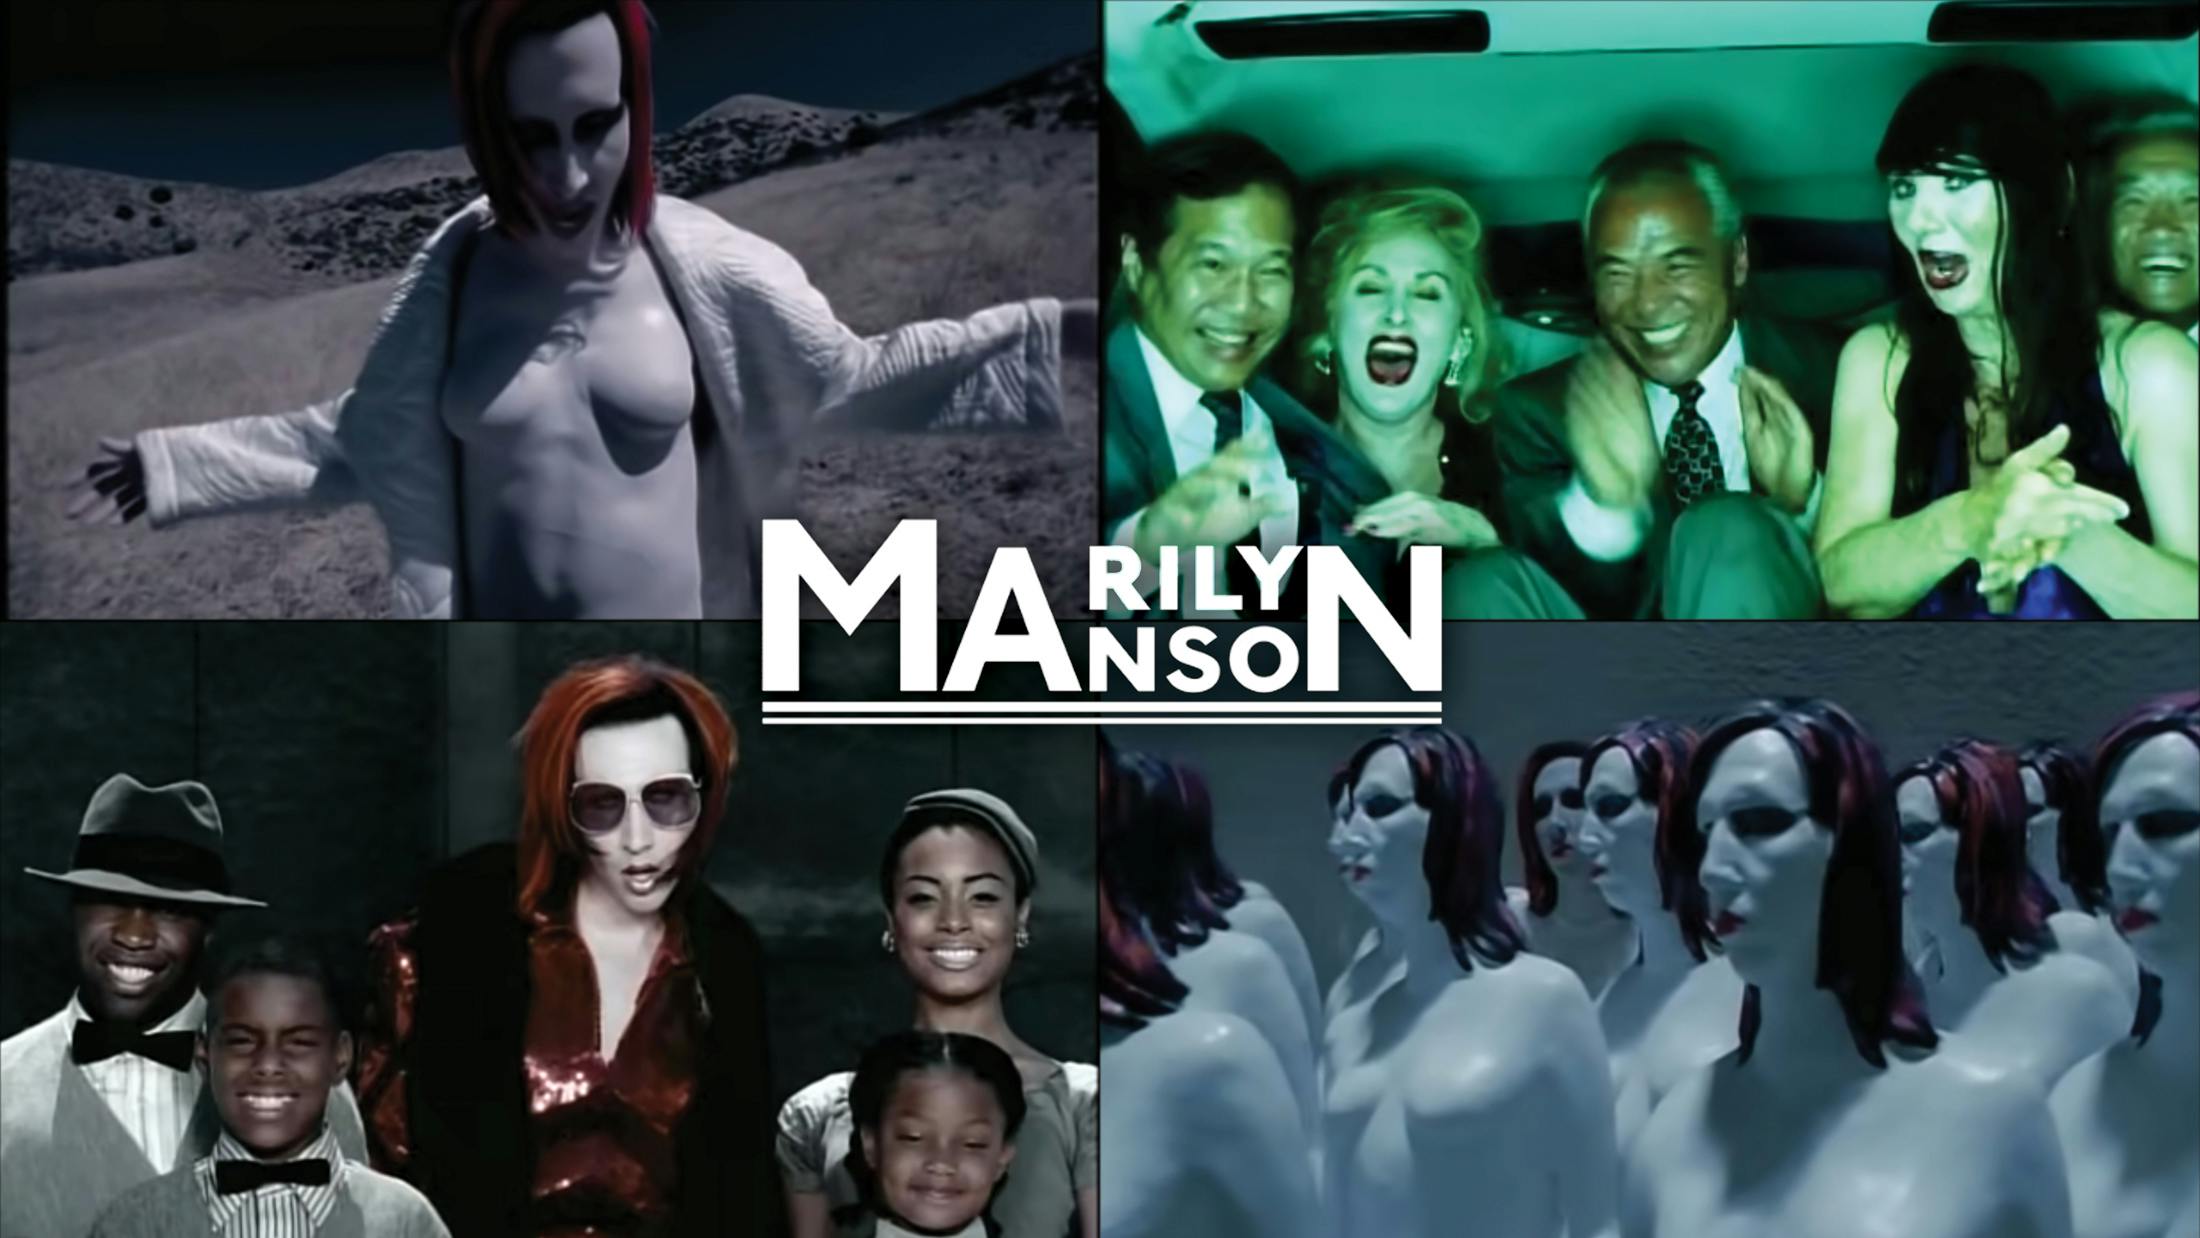 A Deep Dive Into Marilyn Manson’s The Dope Show Music Video